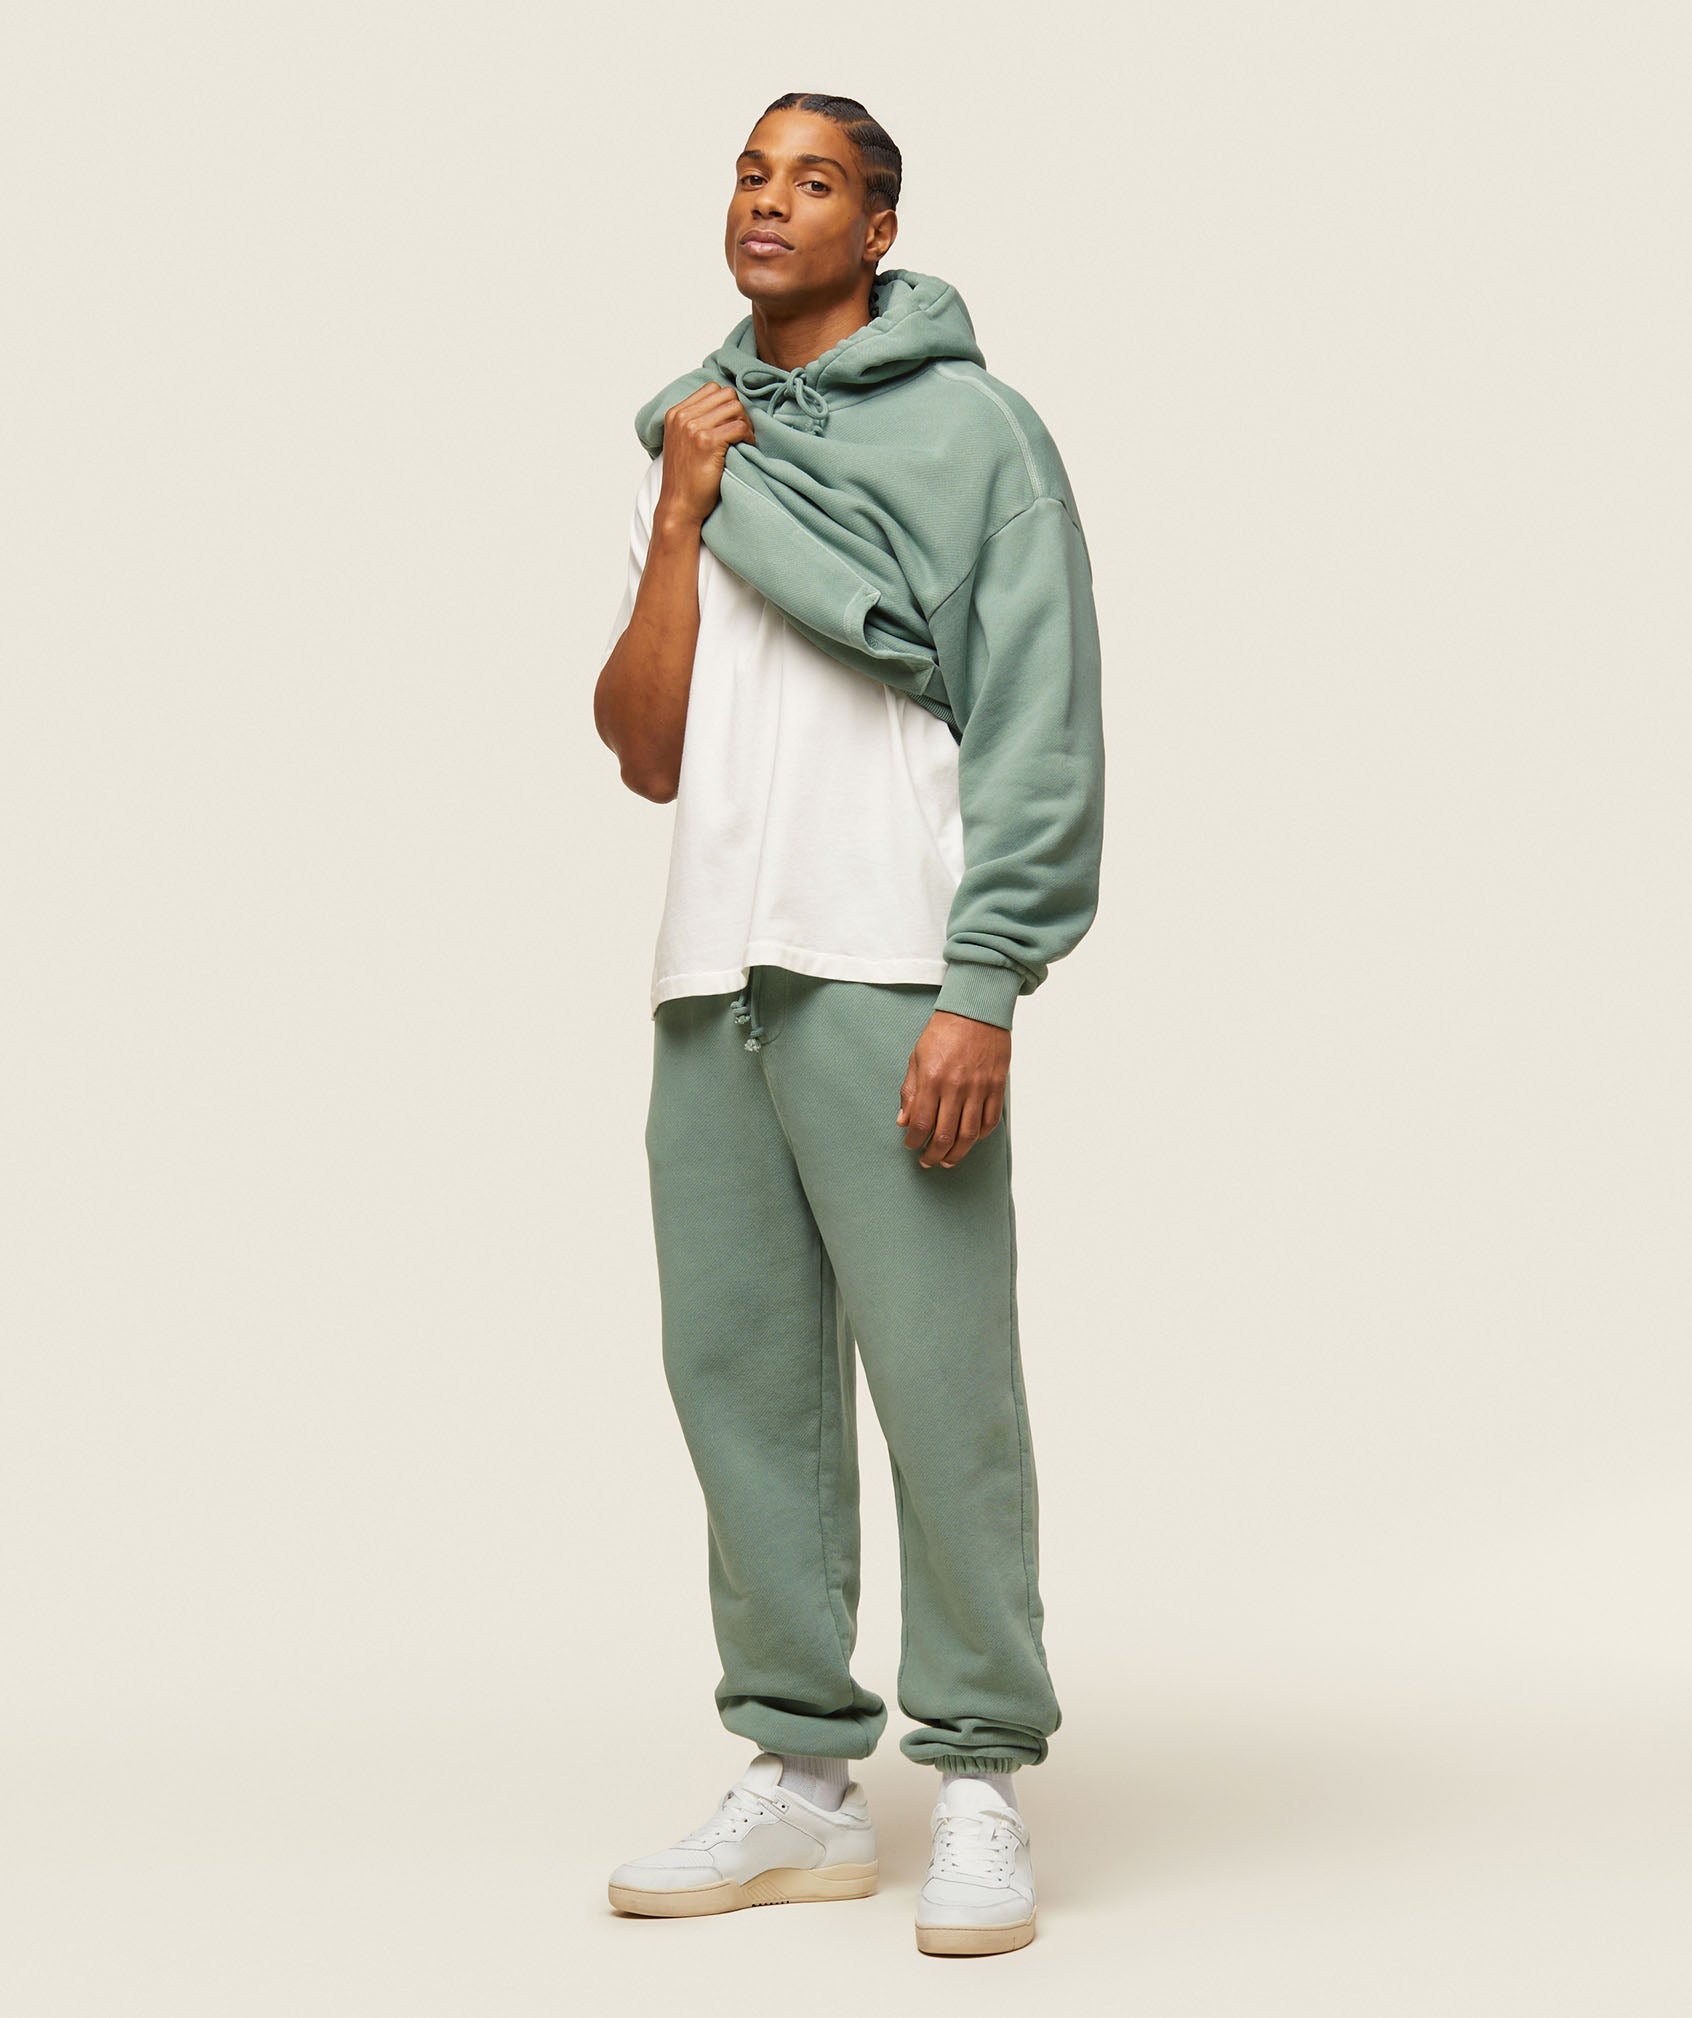 everywear Relaxed Sweatpants in Dollar Green - view 2